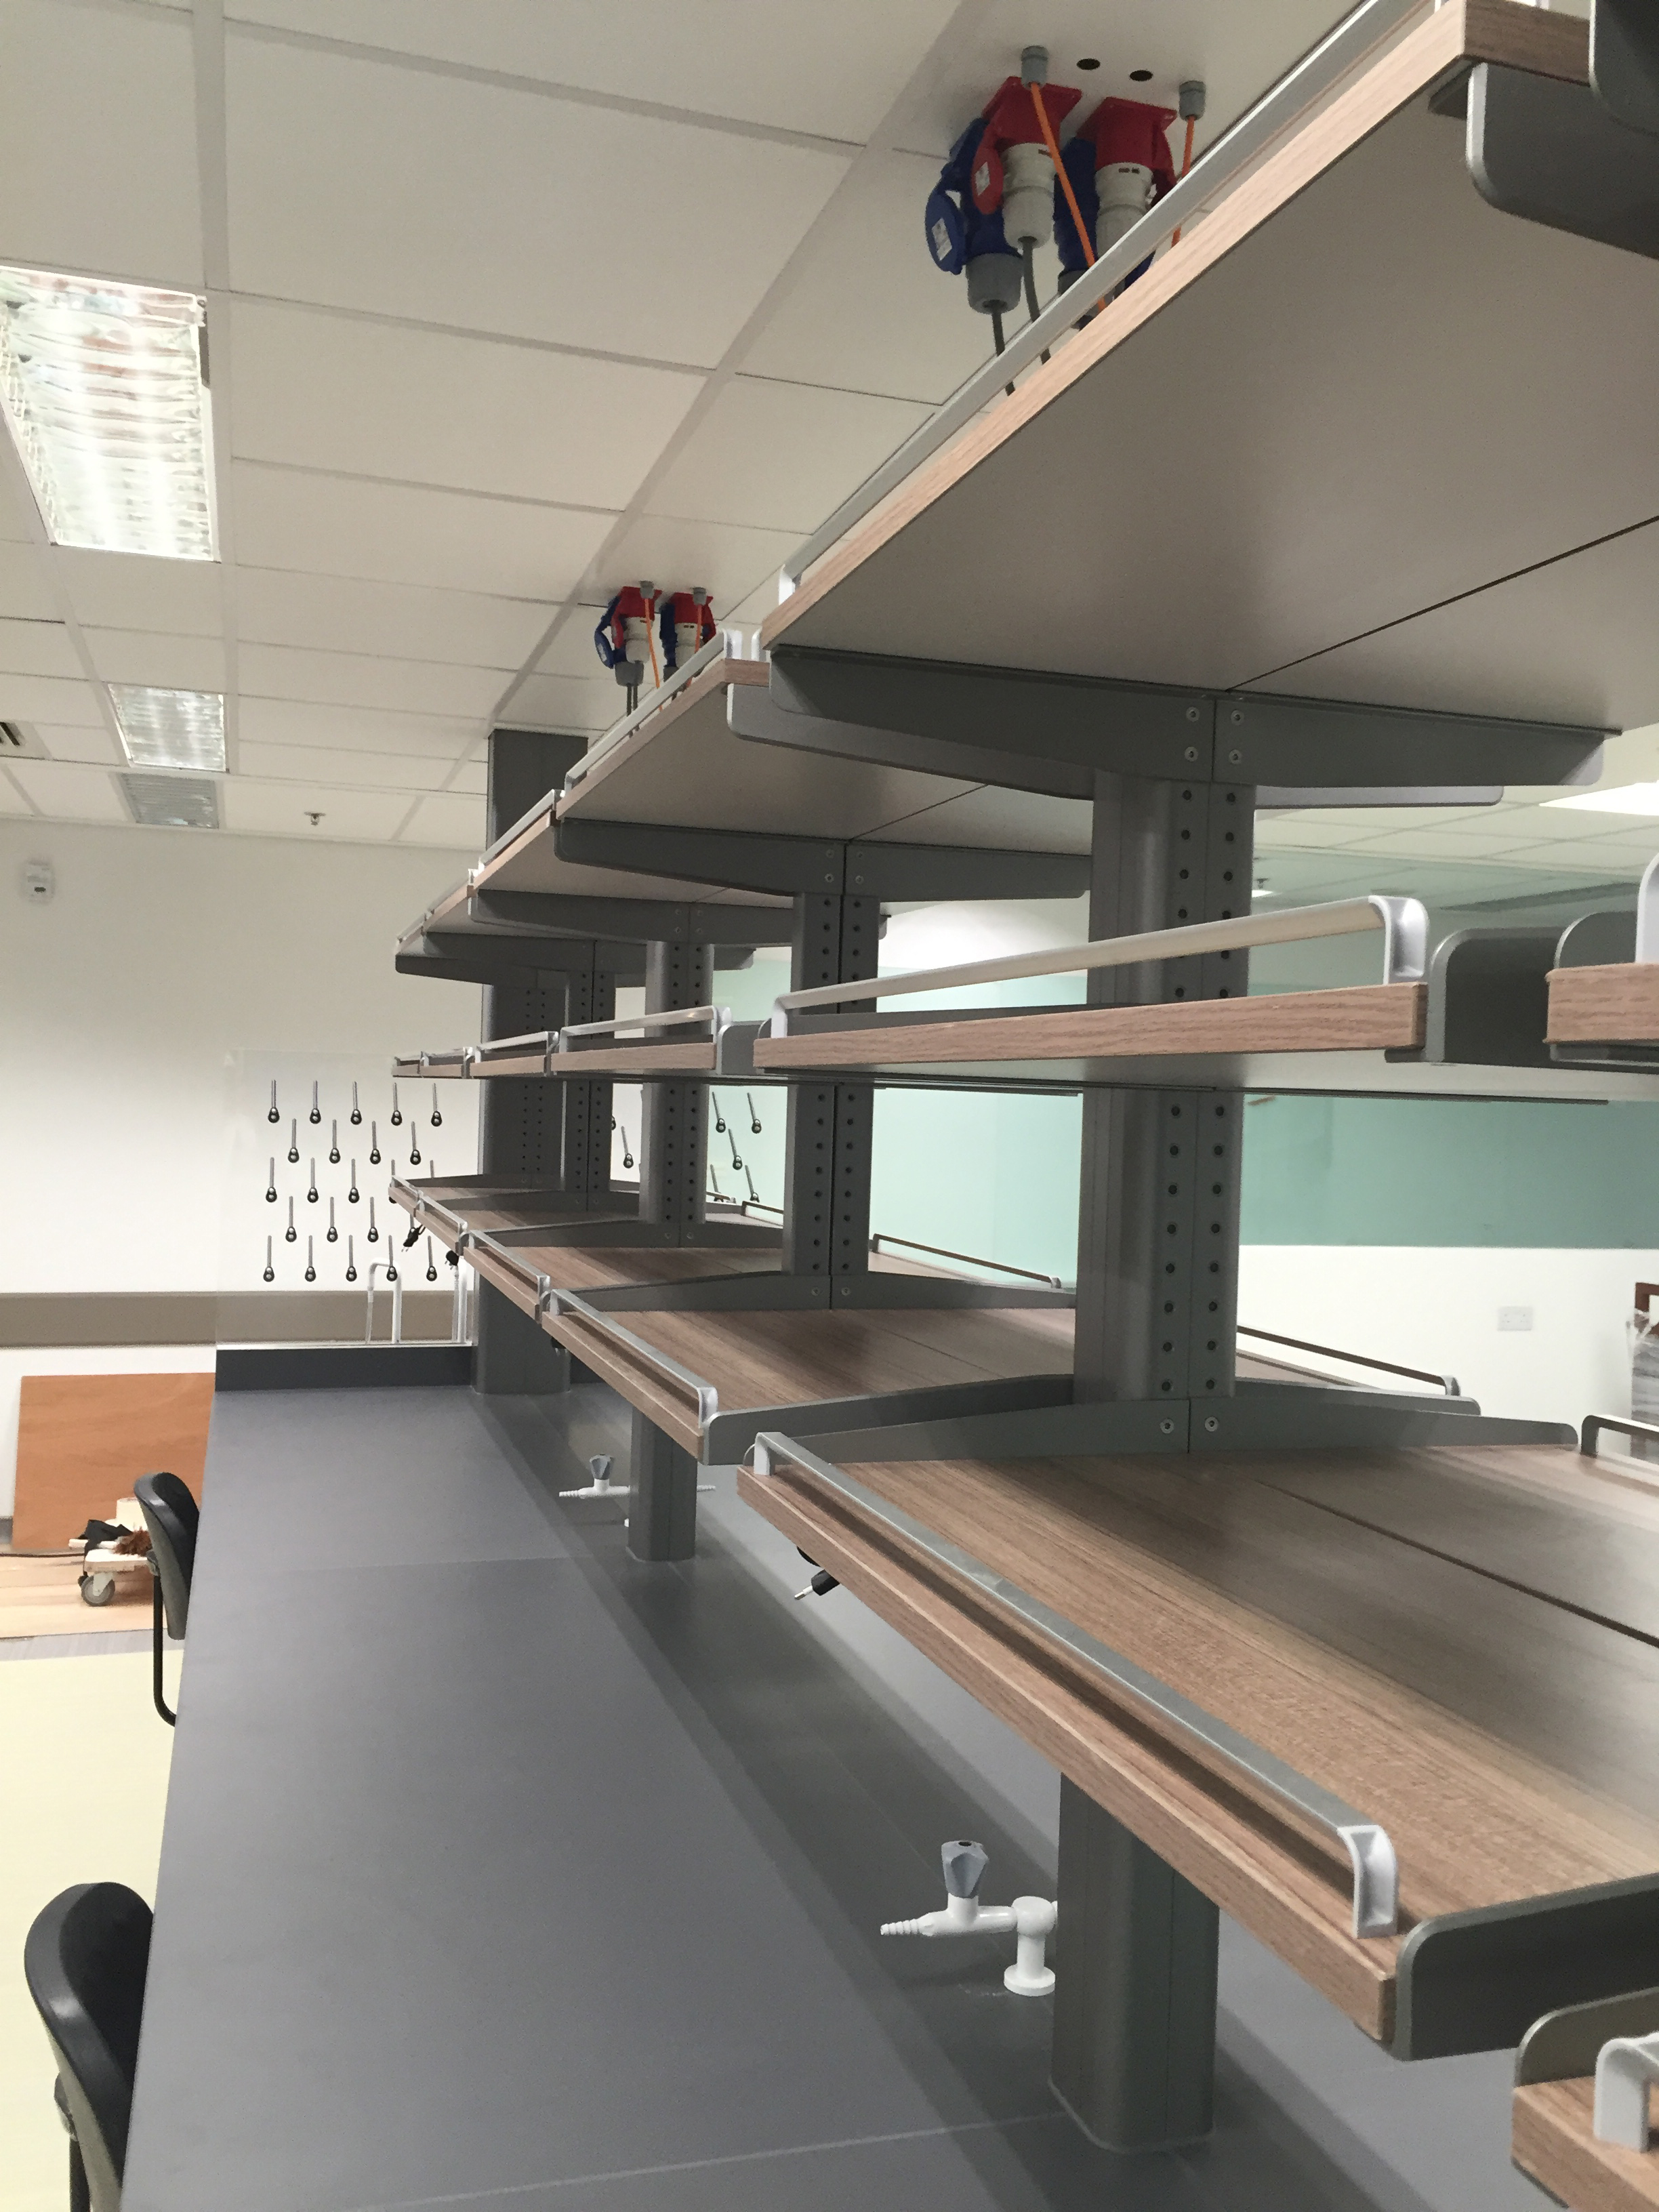 A closeup view of high-capacity heavy load mounting shelves in the laboratory furniture system